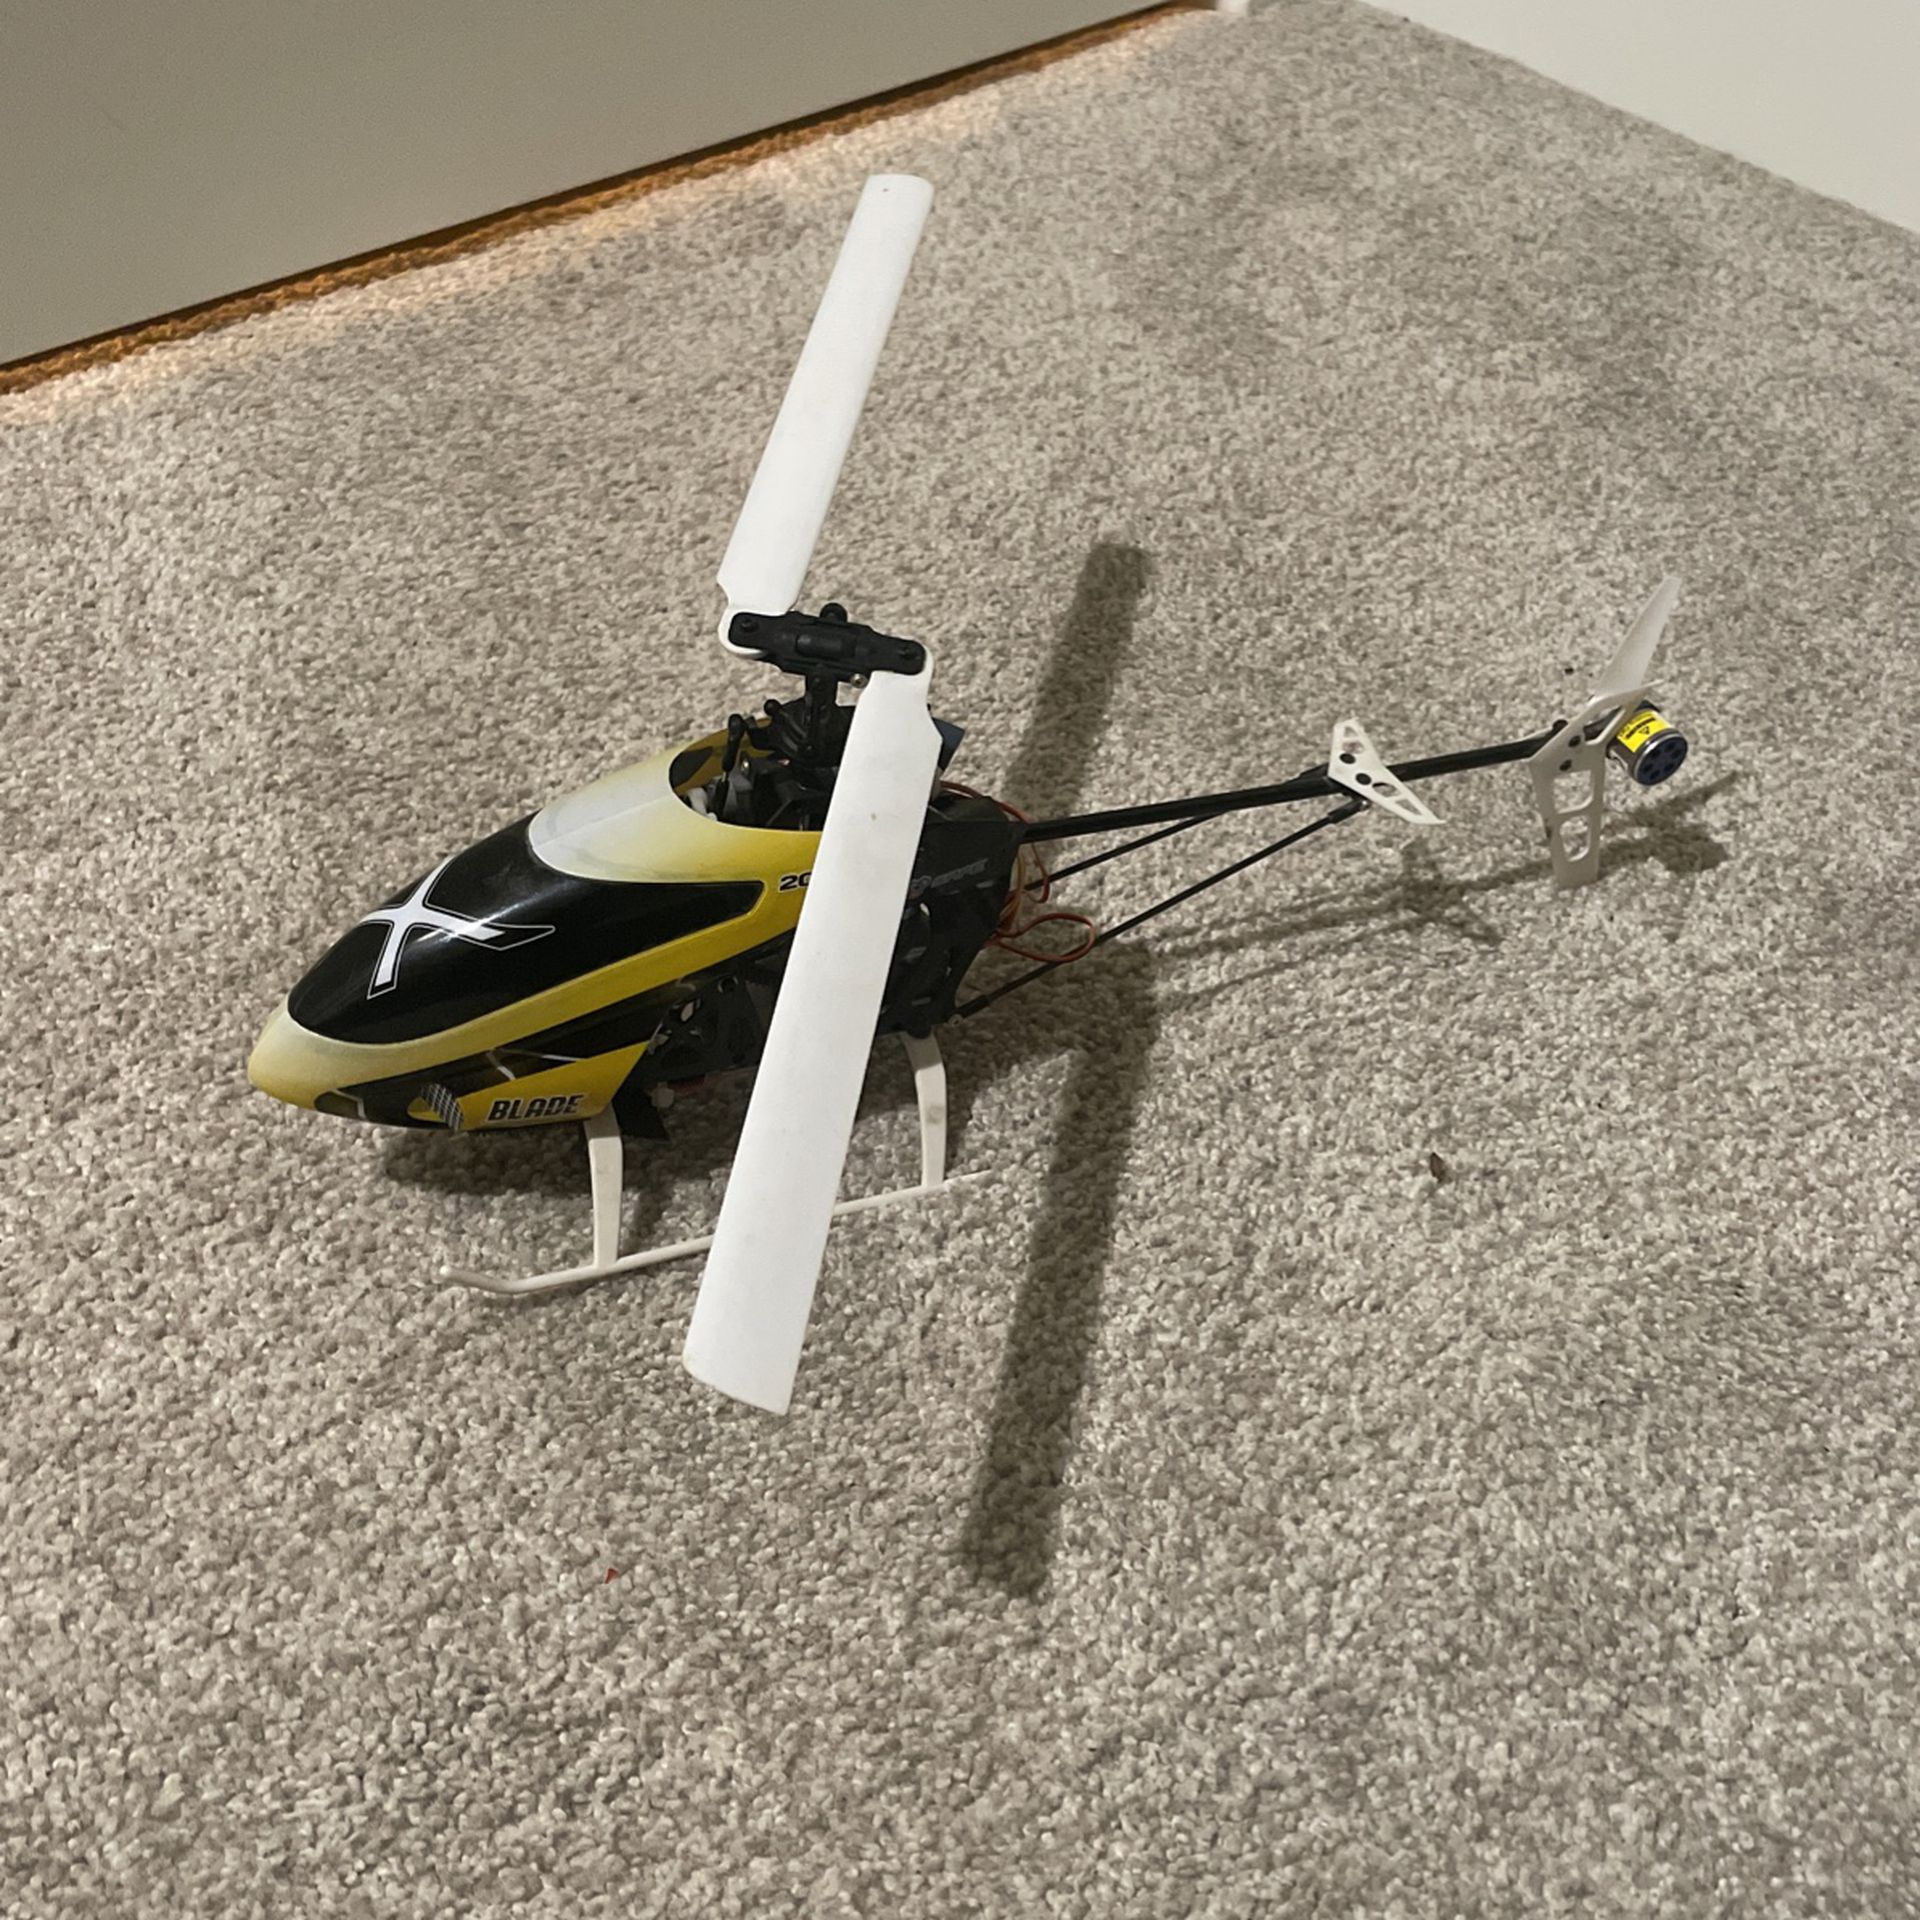 Blade 200 Srx Rc Helicopter